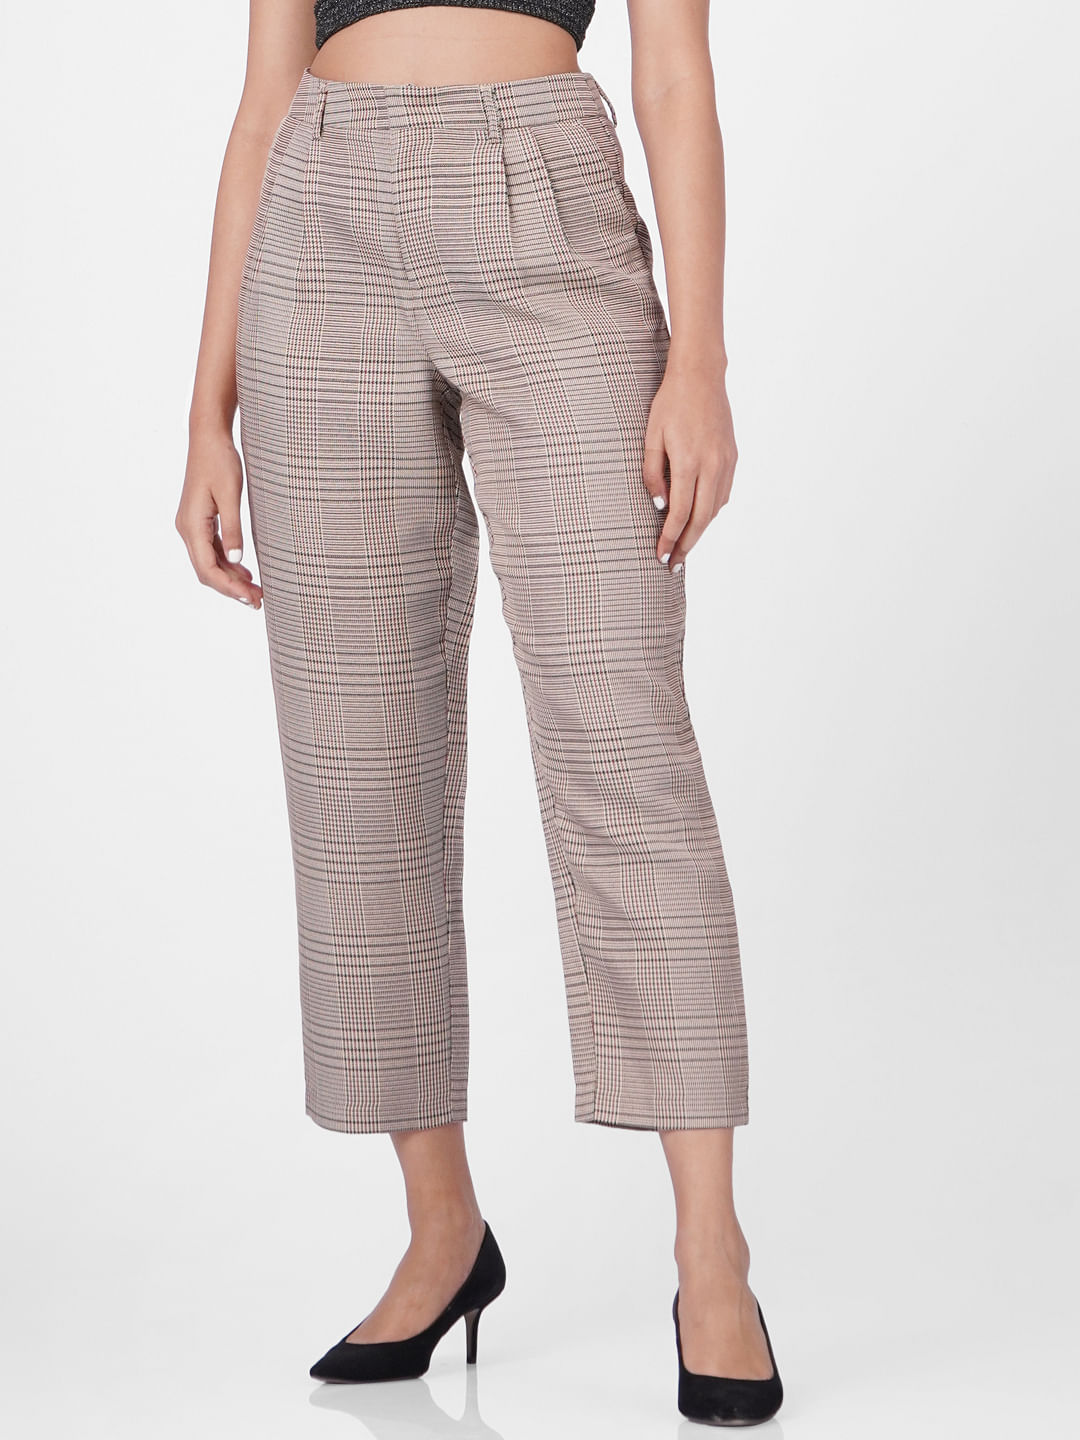 Buy Mast  Harbour Women Navy Blue Checked Formal Trousers  Trousers for  Women 1454594  Myntra